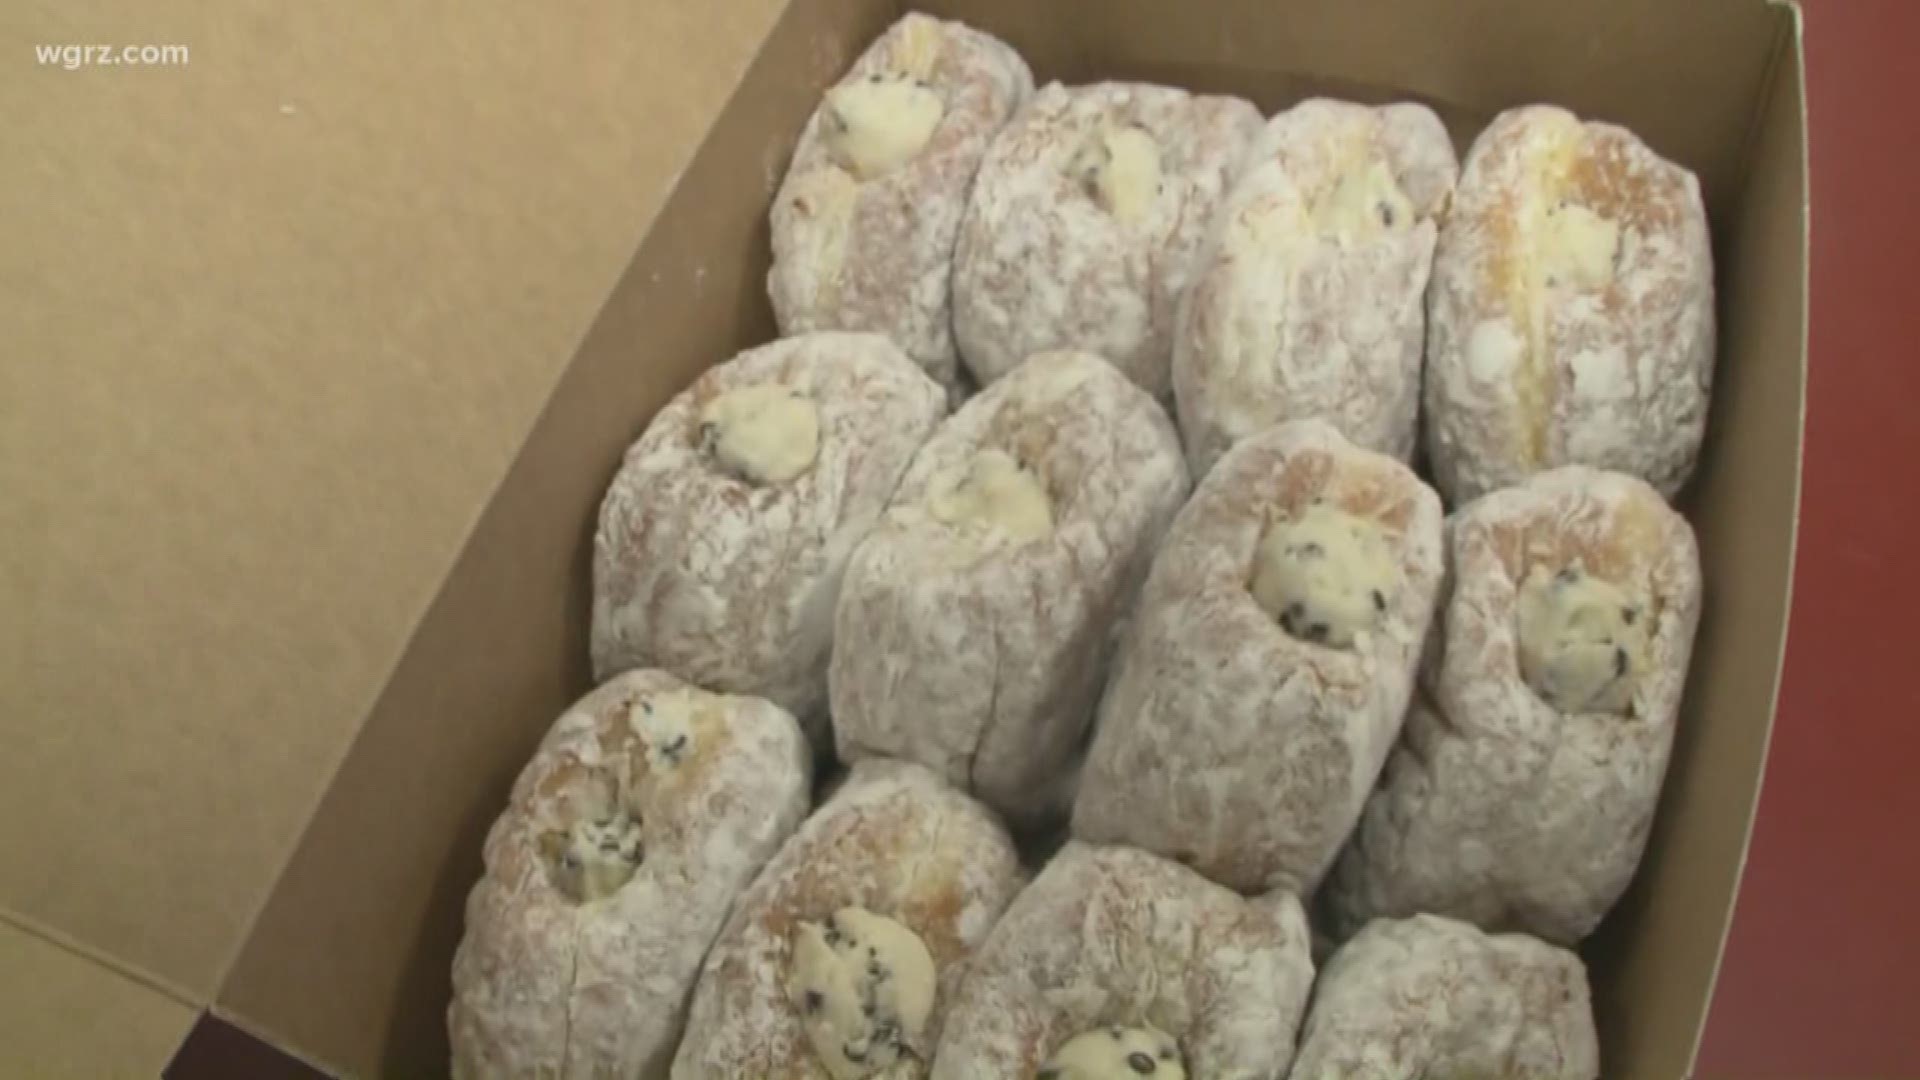 The Cannoli donuts are back at Paula's on Wednesdays throughout the summer